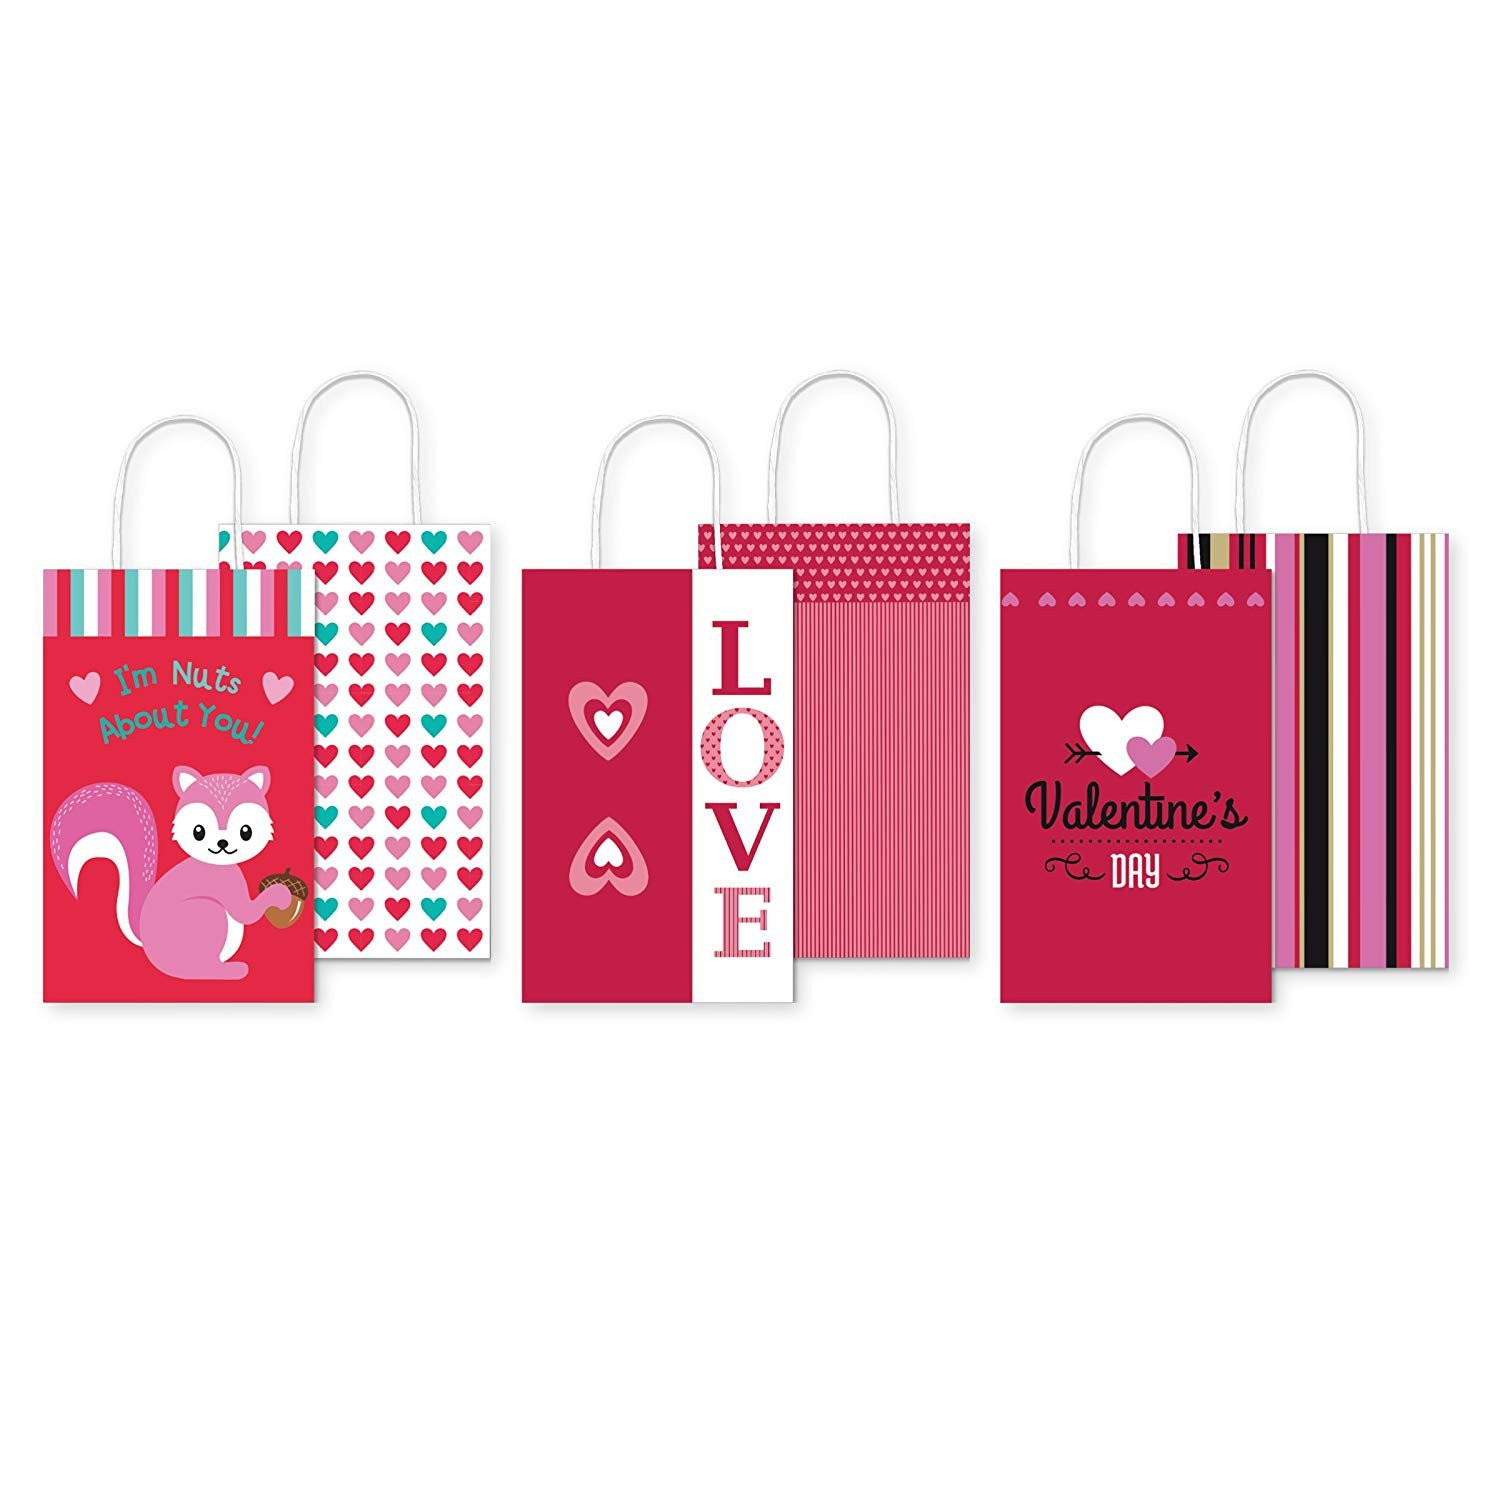 Valentines Gift Bag Ideas
 Pack of 6 Small Kraft Valentine s Gift Bags Perfect Size